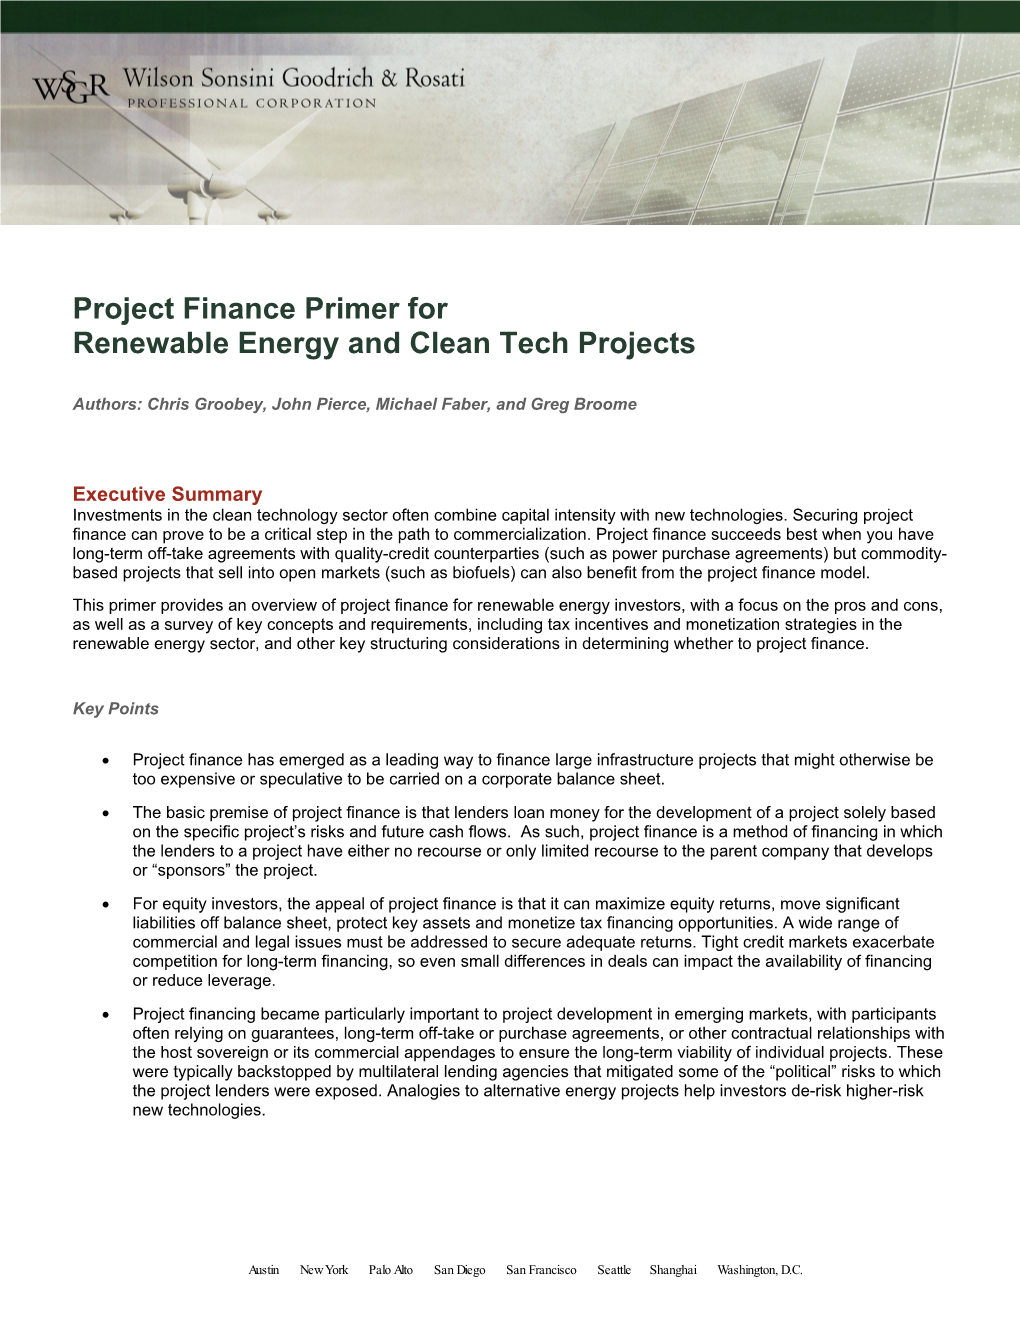 Project Finance Primer for Renewable Energy and Clean Tech Projects